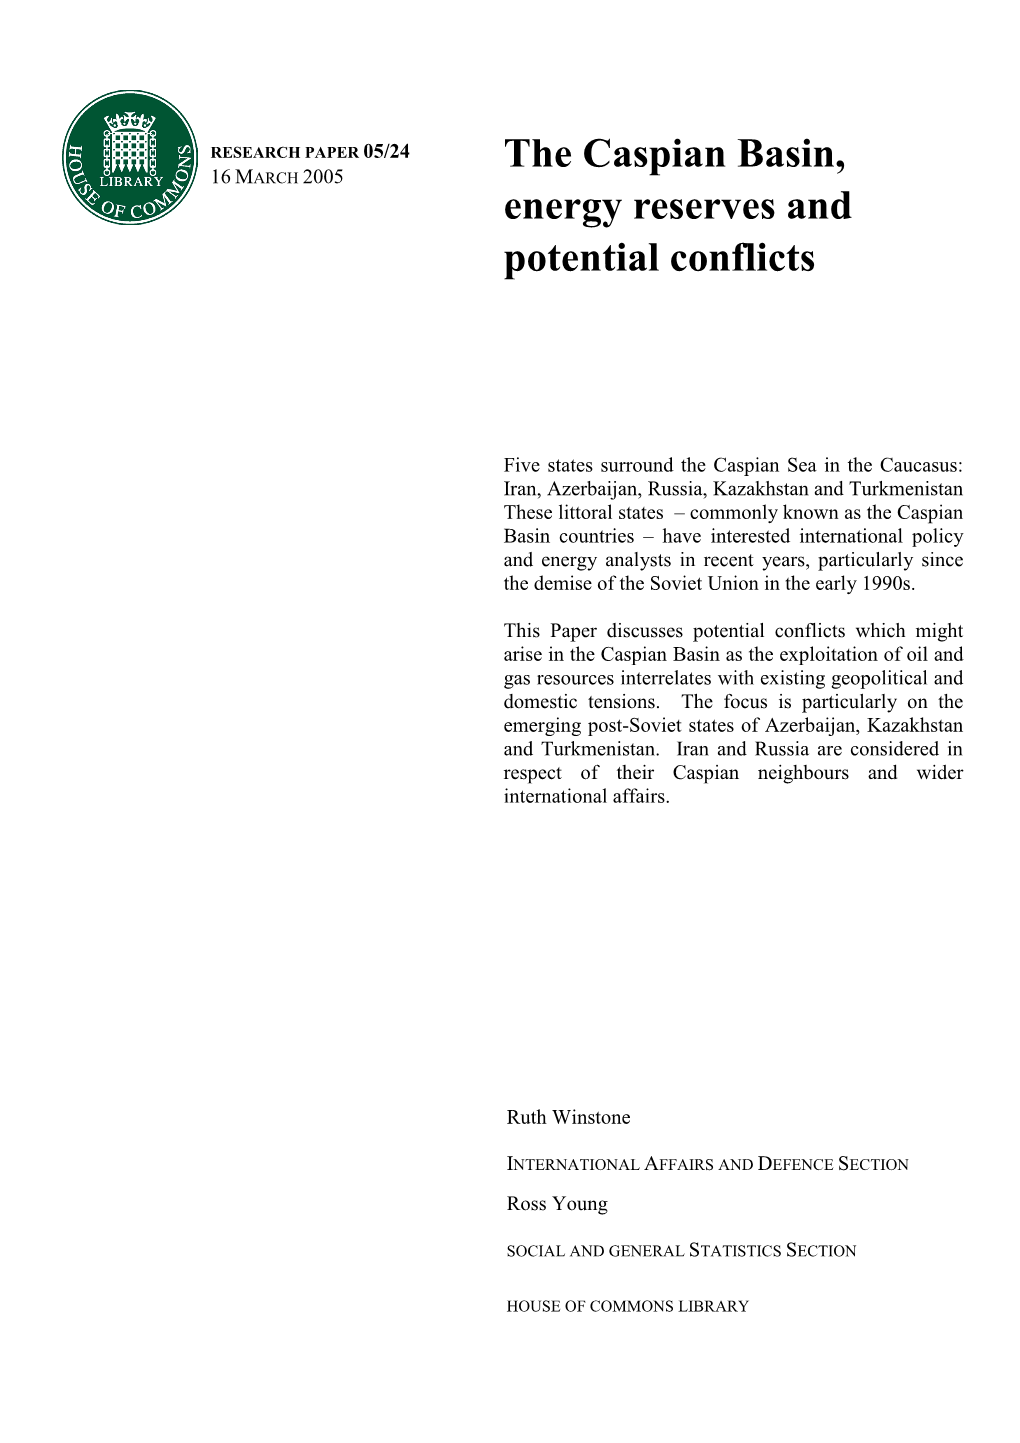 The Caspian Basin, Energy Reserves and Potential Conflicts